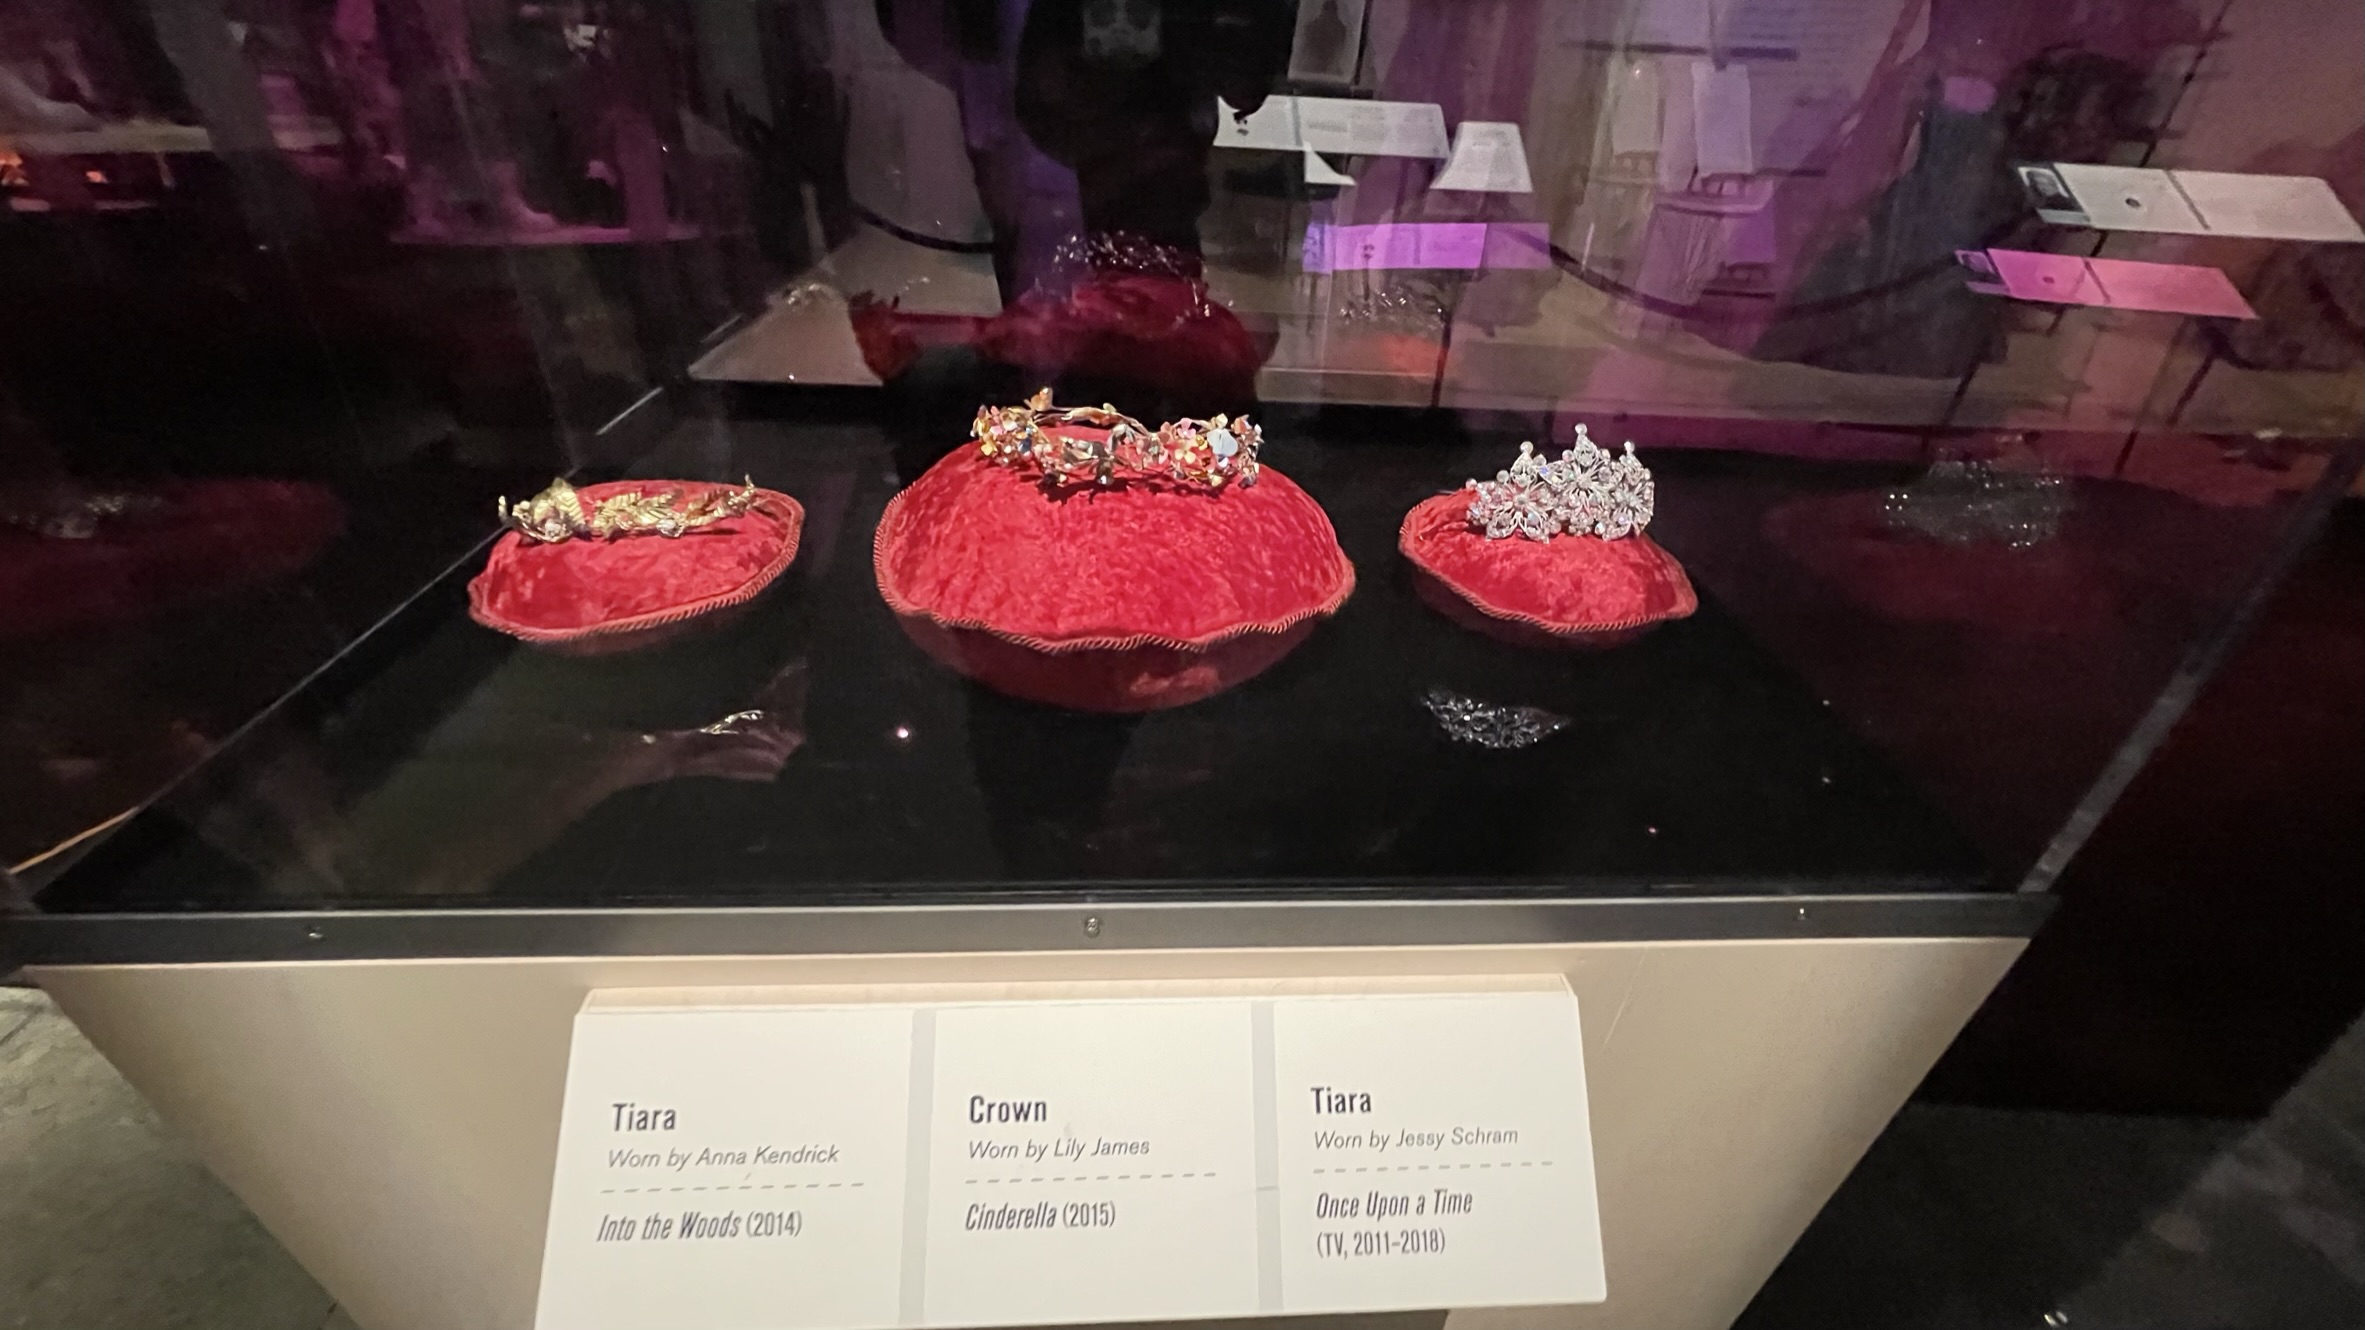 Disney Archives Disney Heroes & Villains 2 Tiara's and a Crown. Tiara from Into the Woods and Once Upon a Time, and the Crown from Cinderella 2015